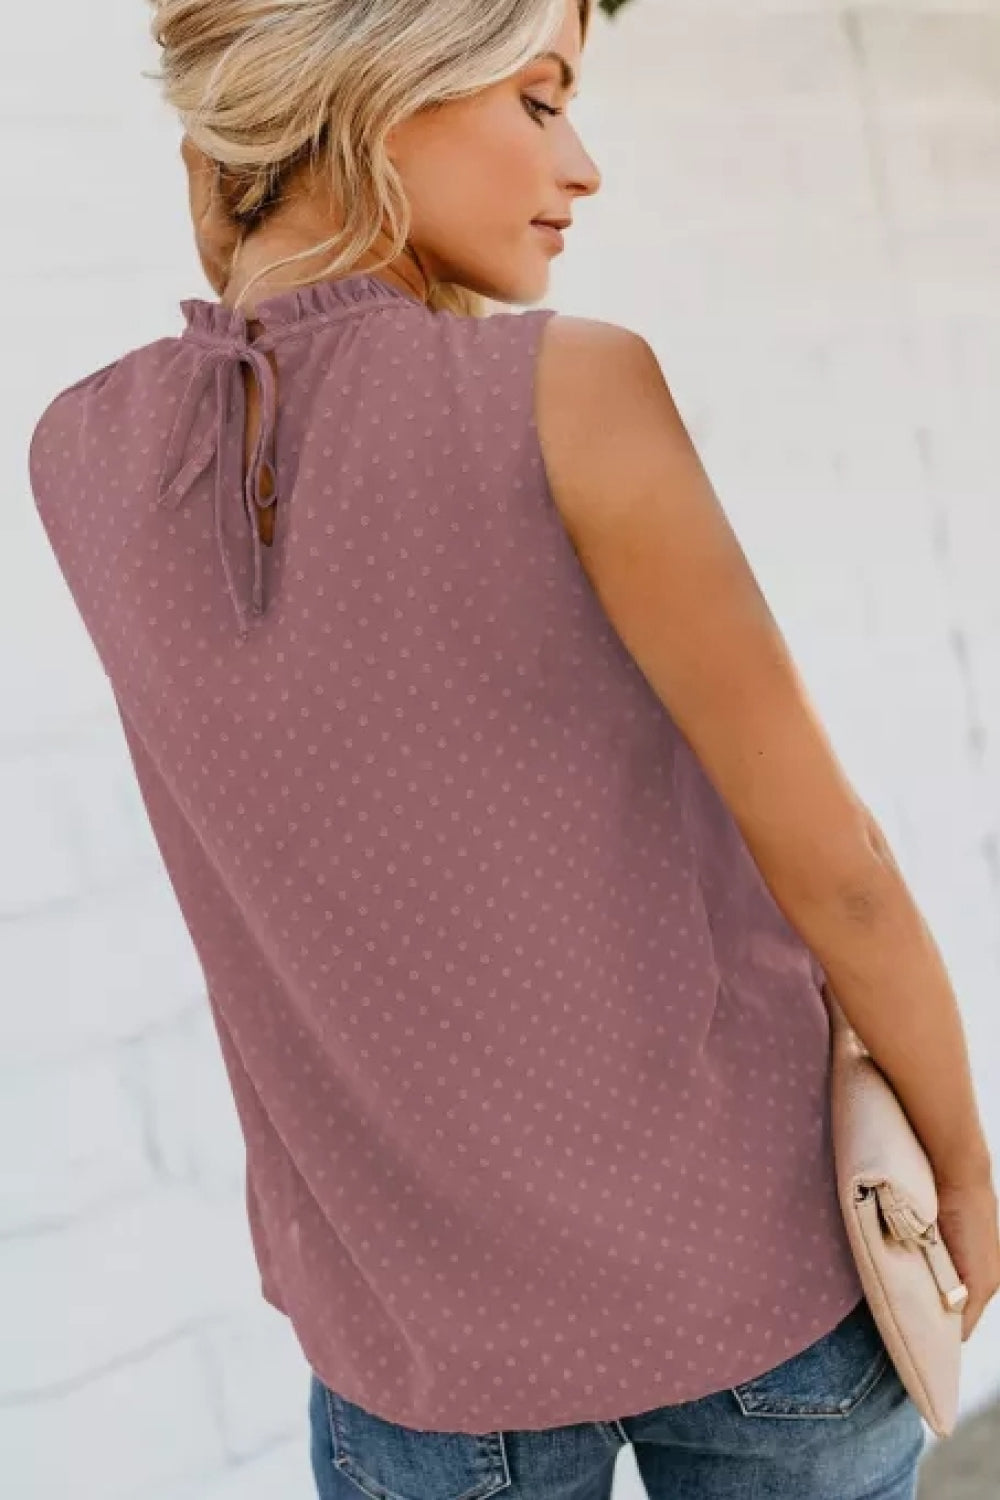 Smocked Tie Back Frill Trim Tank-SHIPS DIRECTLY TO YOU!